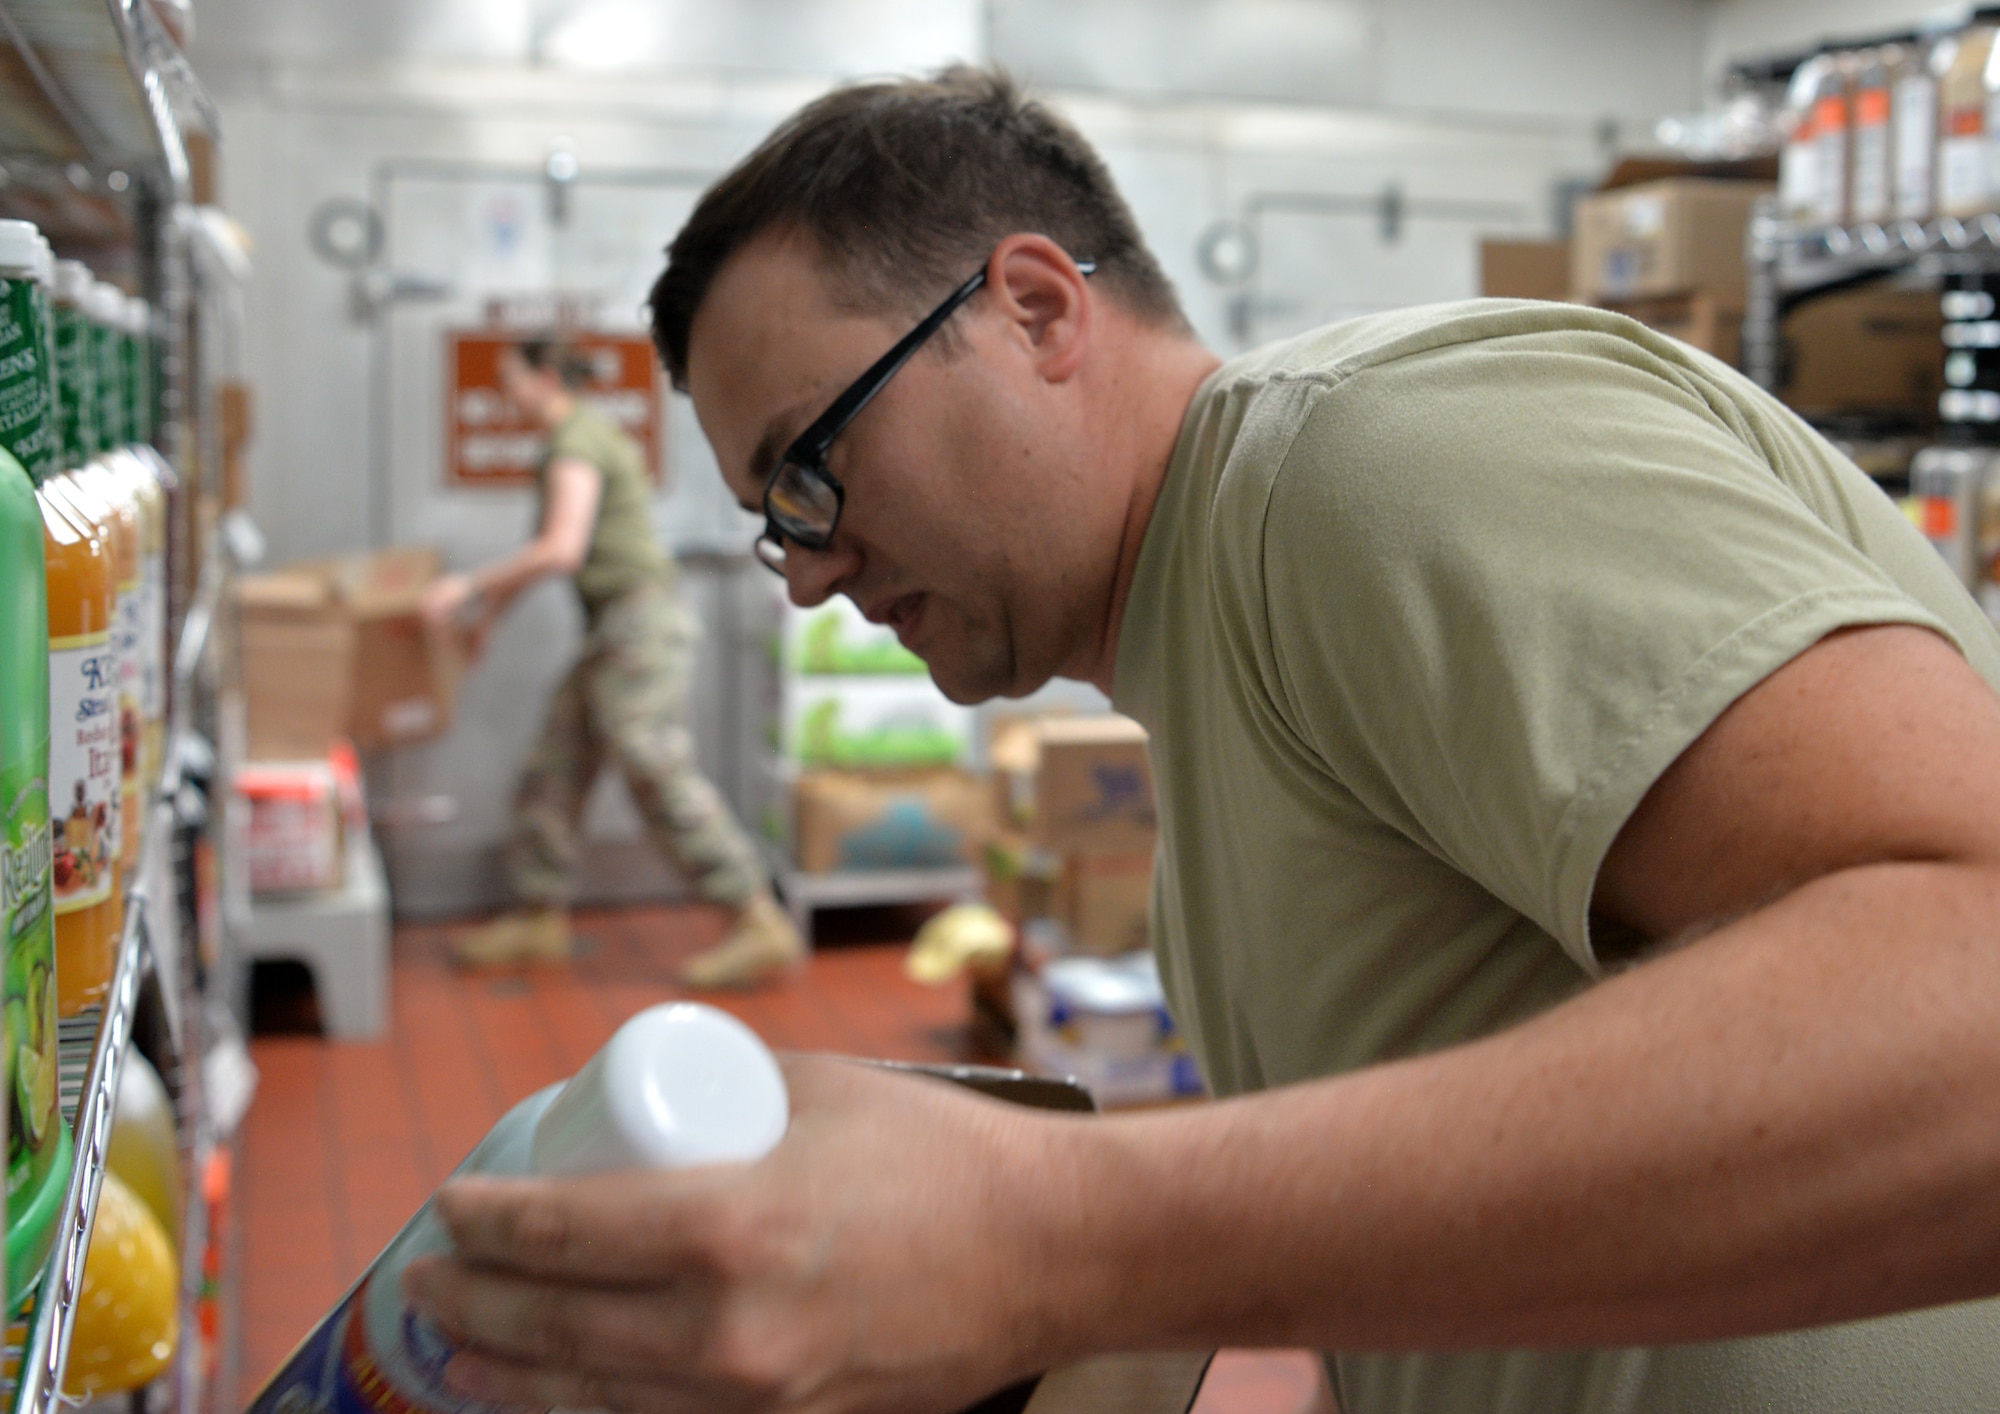 Staff Sgt. Shane Thornton, a storeroom manager, assigned to 99th Force Support Squadron, restocks inventory during Red Flag 19-3 at Nellis Air Force Base, Nev, July 19, 2019. Red Flag is a combat training exercise designed to expose pilots to their first 10 “combat missions”, allowing them to be more confident and effective in real-world combat. (U.S. Air Force photo by Tech. Sgt. Bryan Magee)